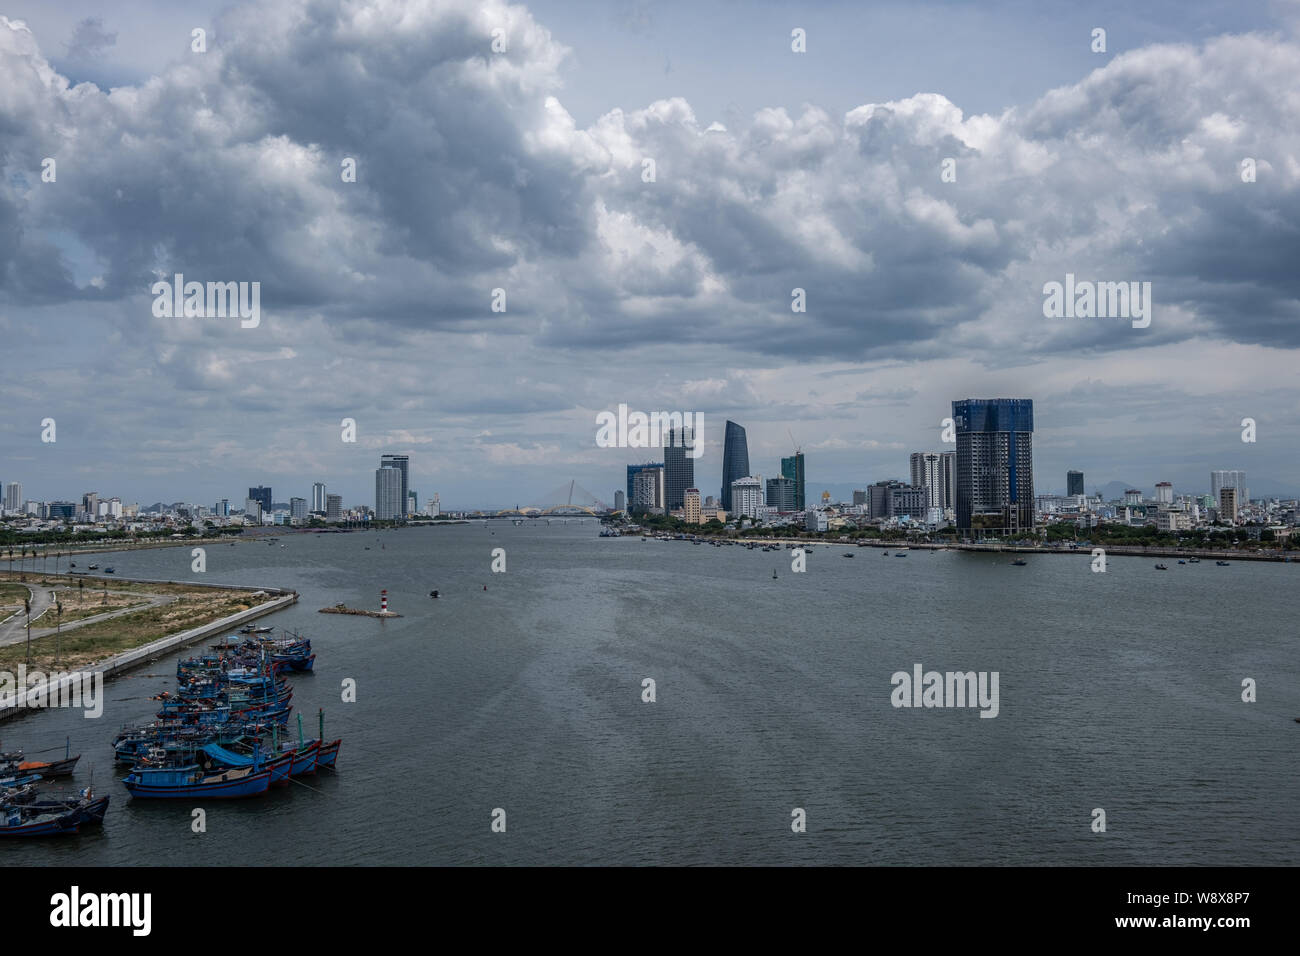 Overview of Danang city in central Vietnam Stock Photo